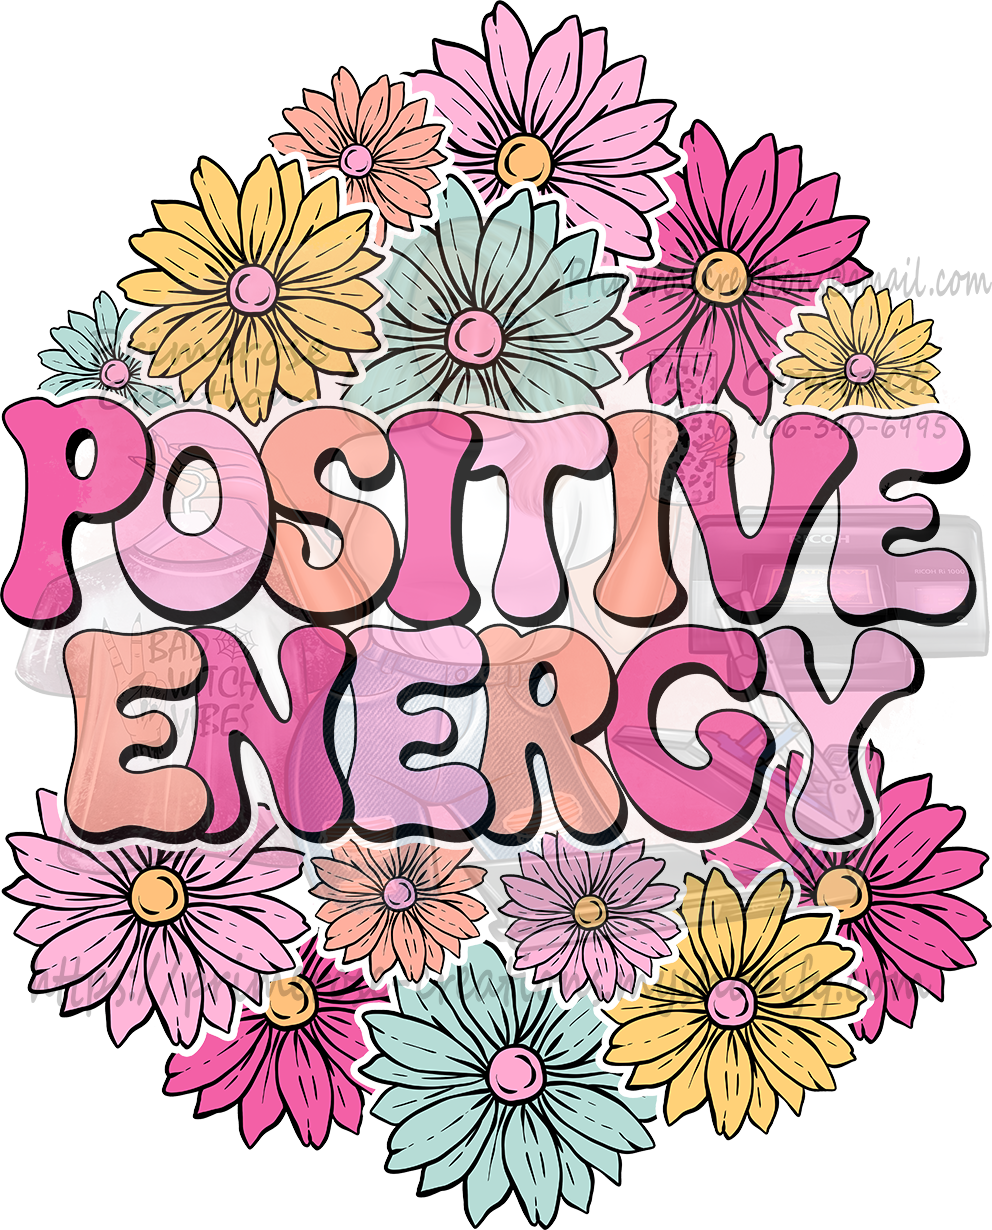 Positive Energy With Pocket